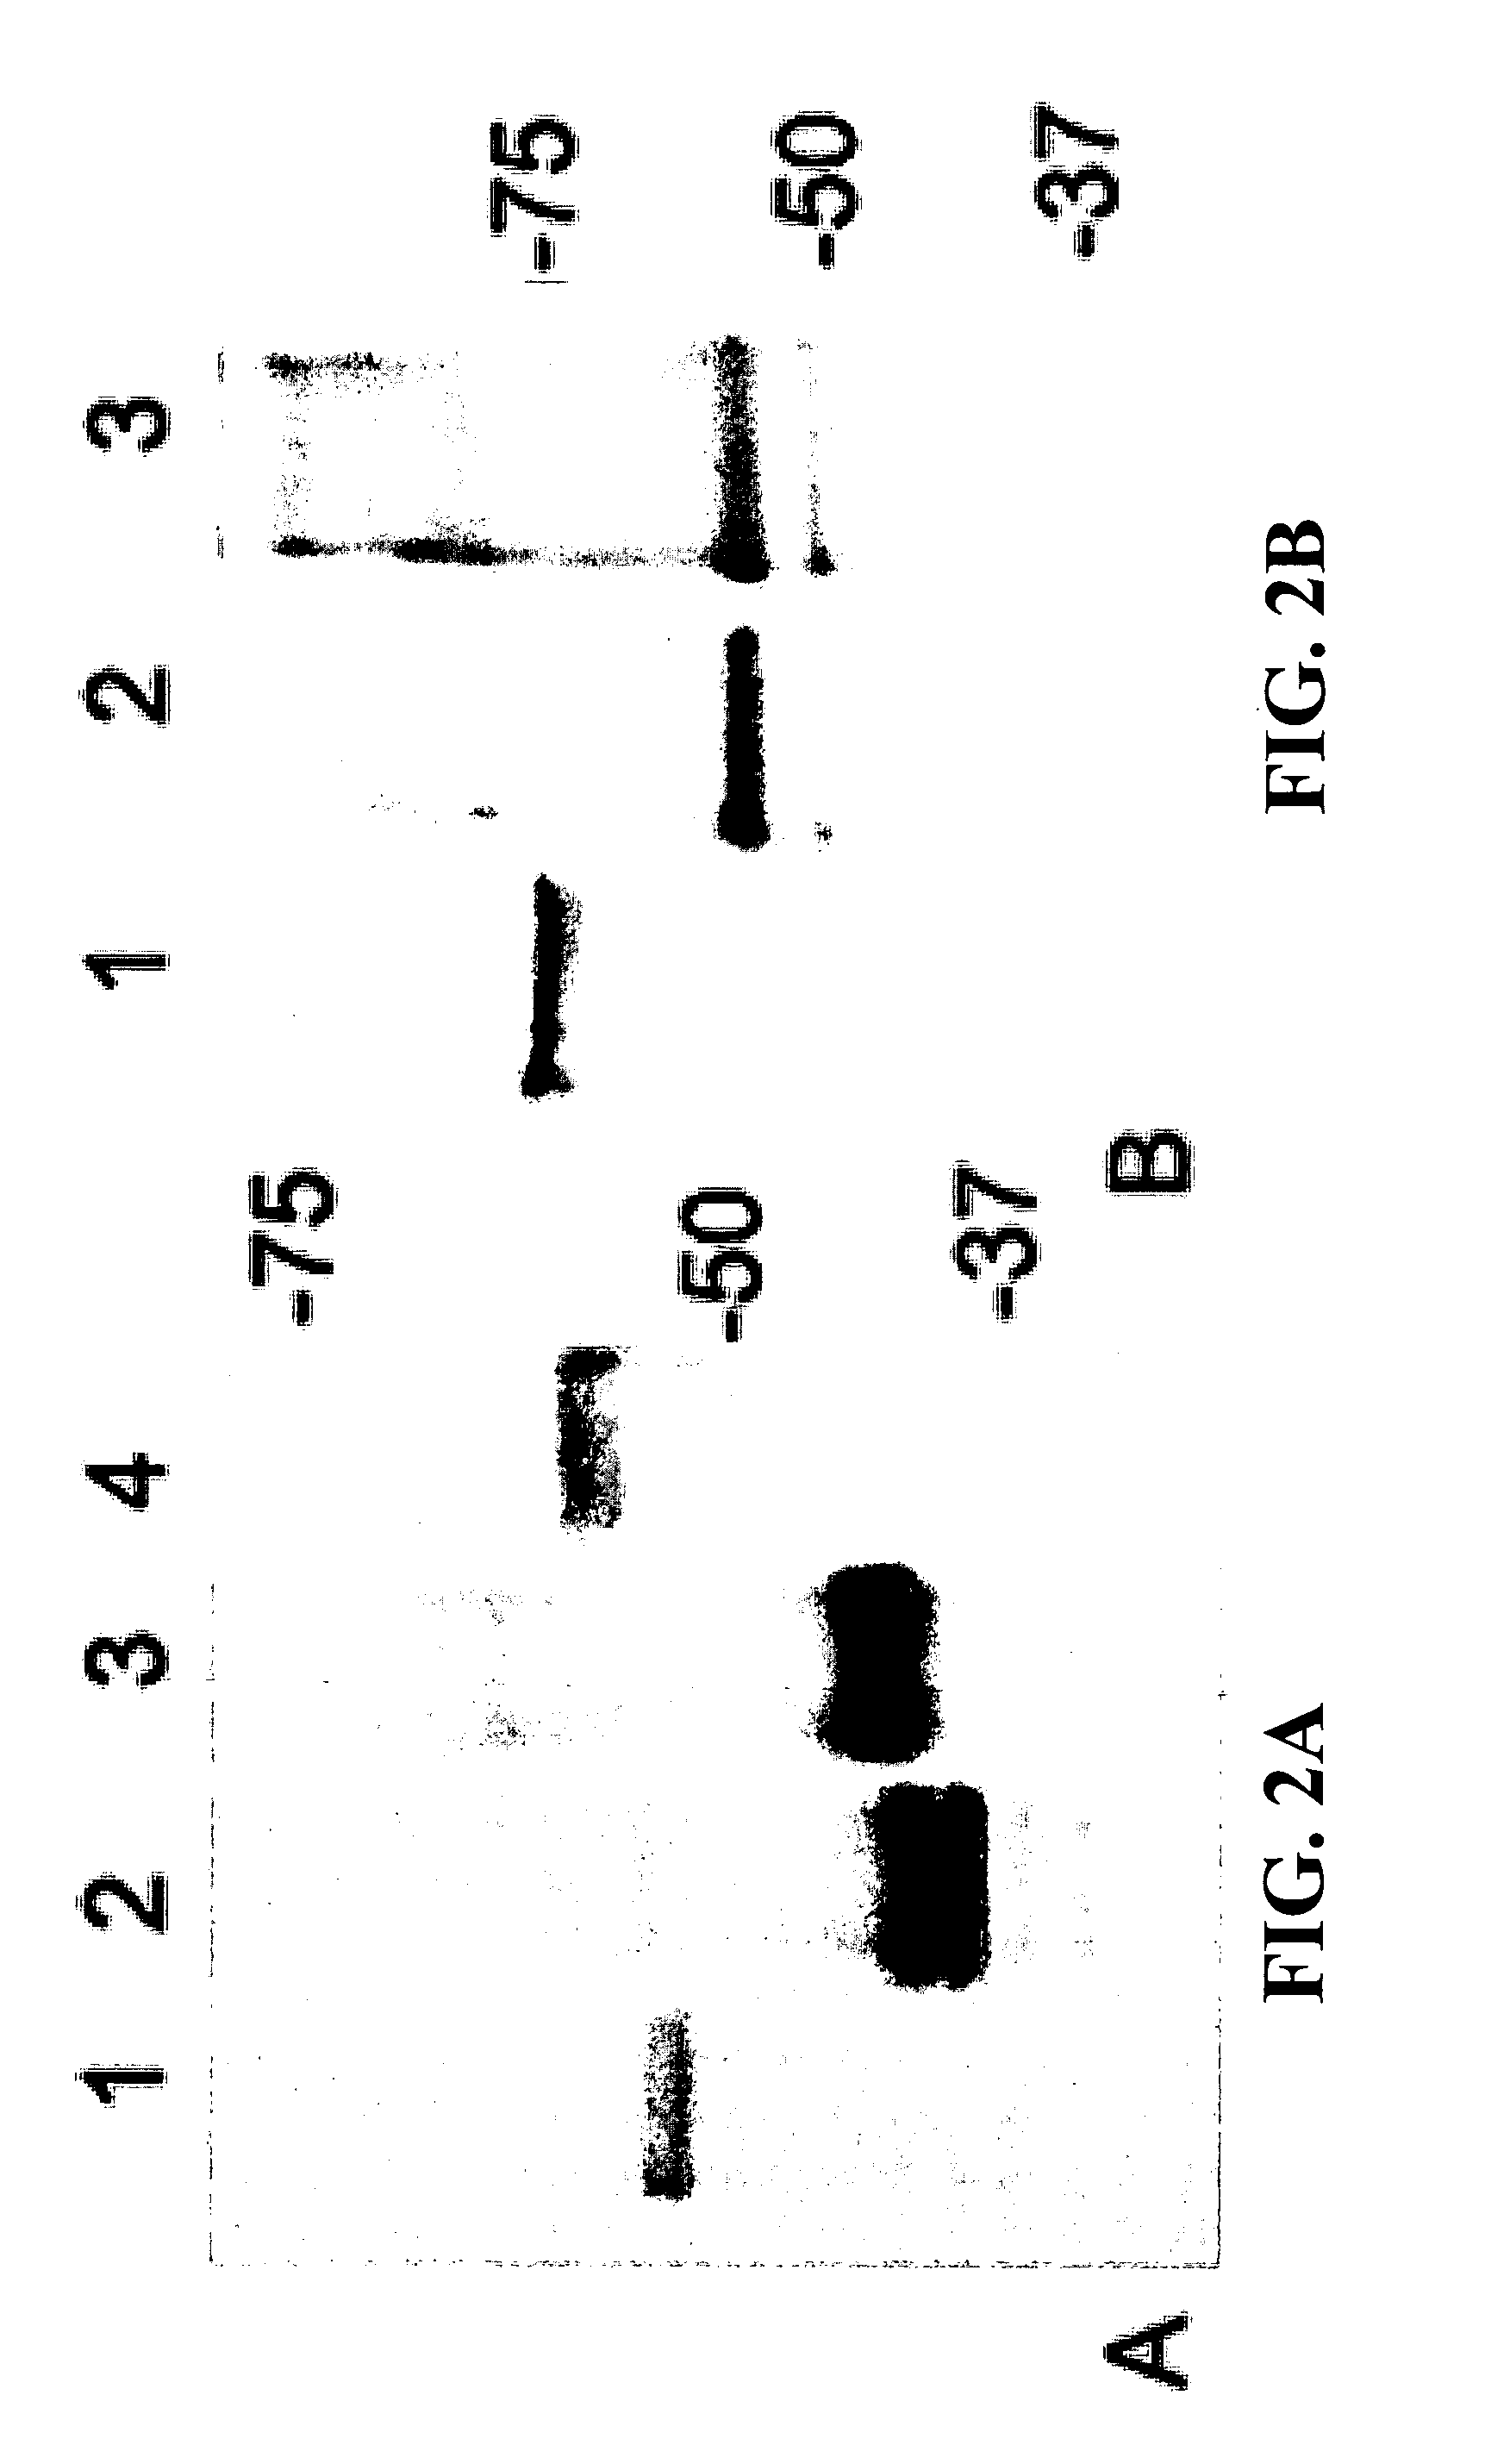 P153 and P156 antigens for the immunodiagnosis of canine and human ehrlichioses and uses thereof